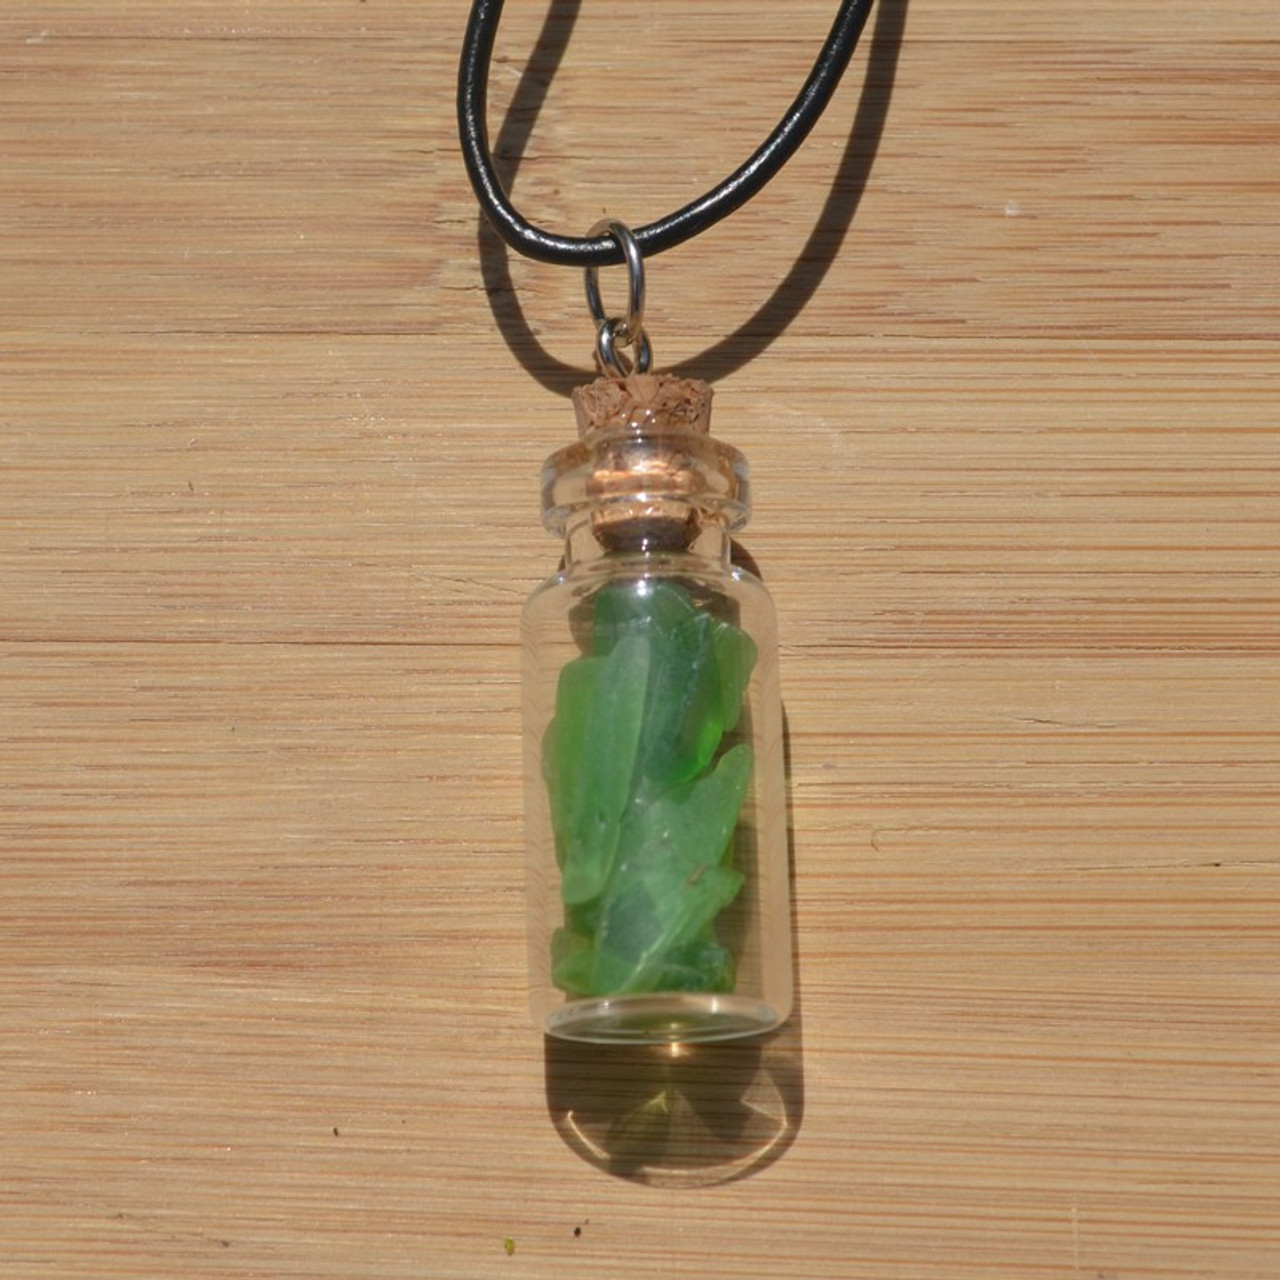 Green Sea Glass Necklace in a Glass Vial on a Leather Cord - Made to Order